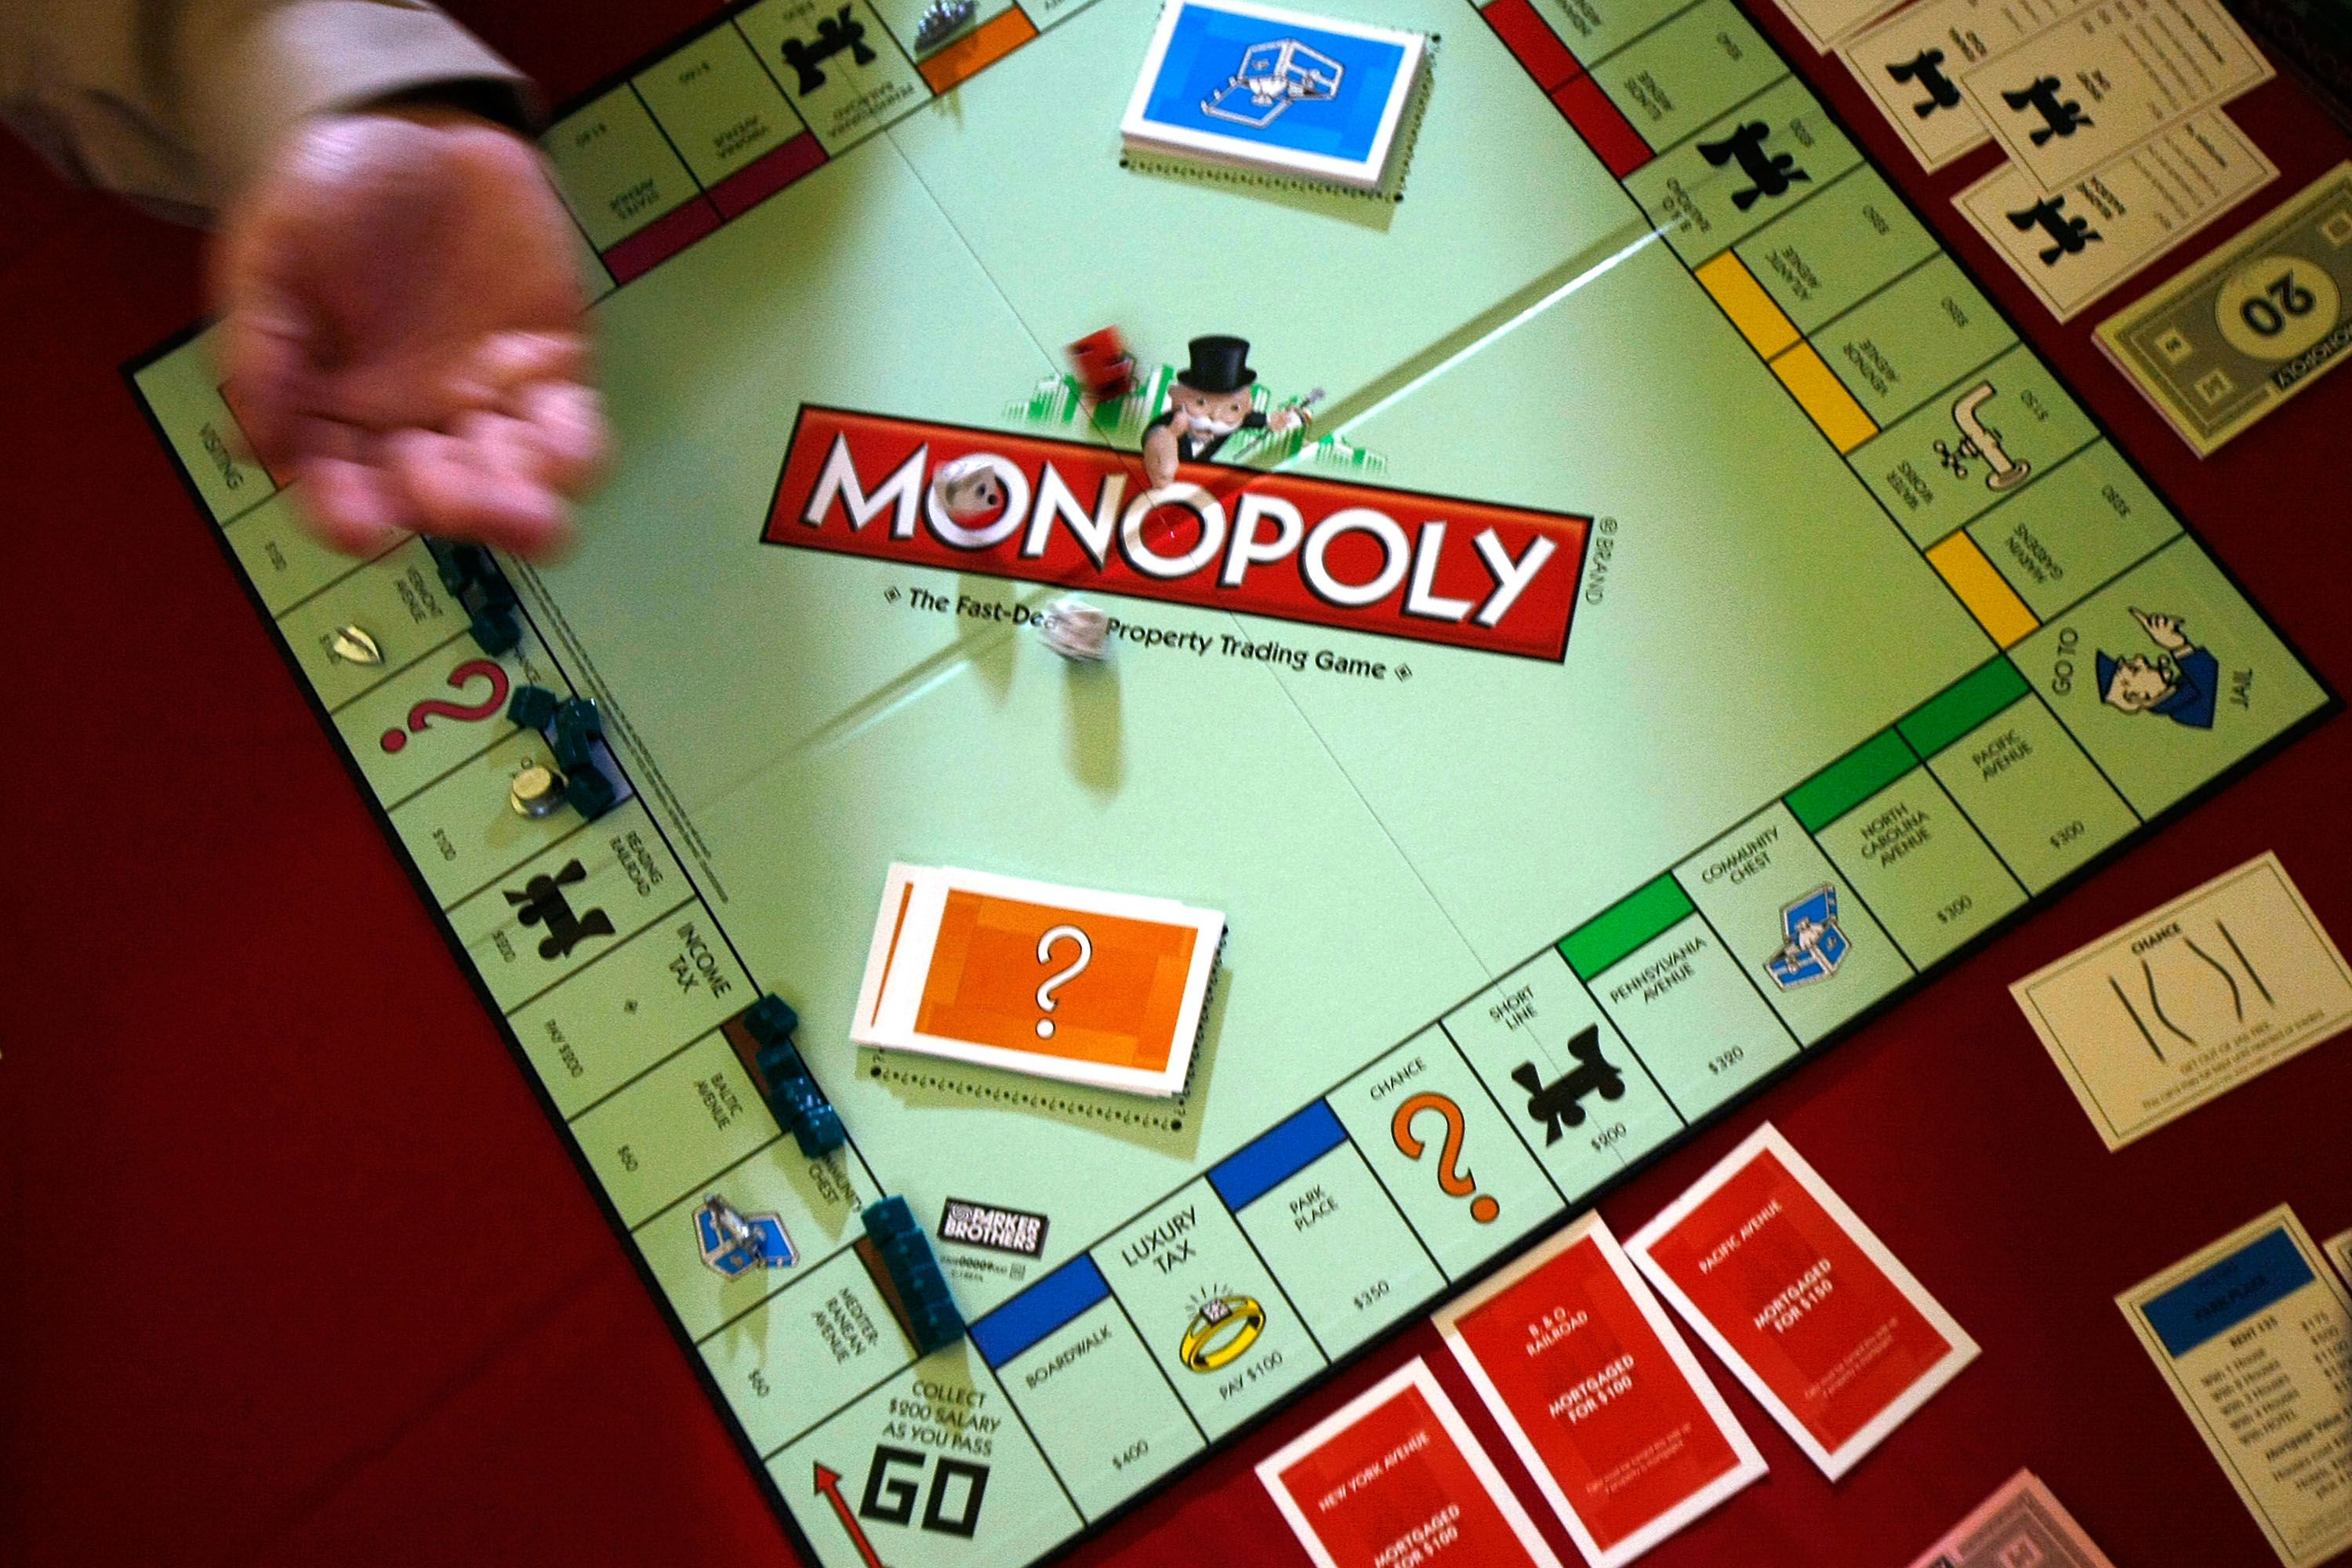 Verbazingwekkend roltrap Observatorium Monopoly set being released with real money | CNN